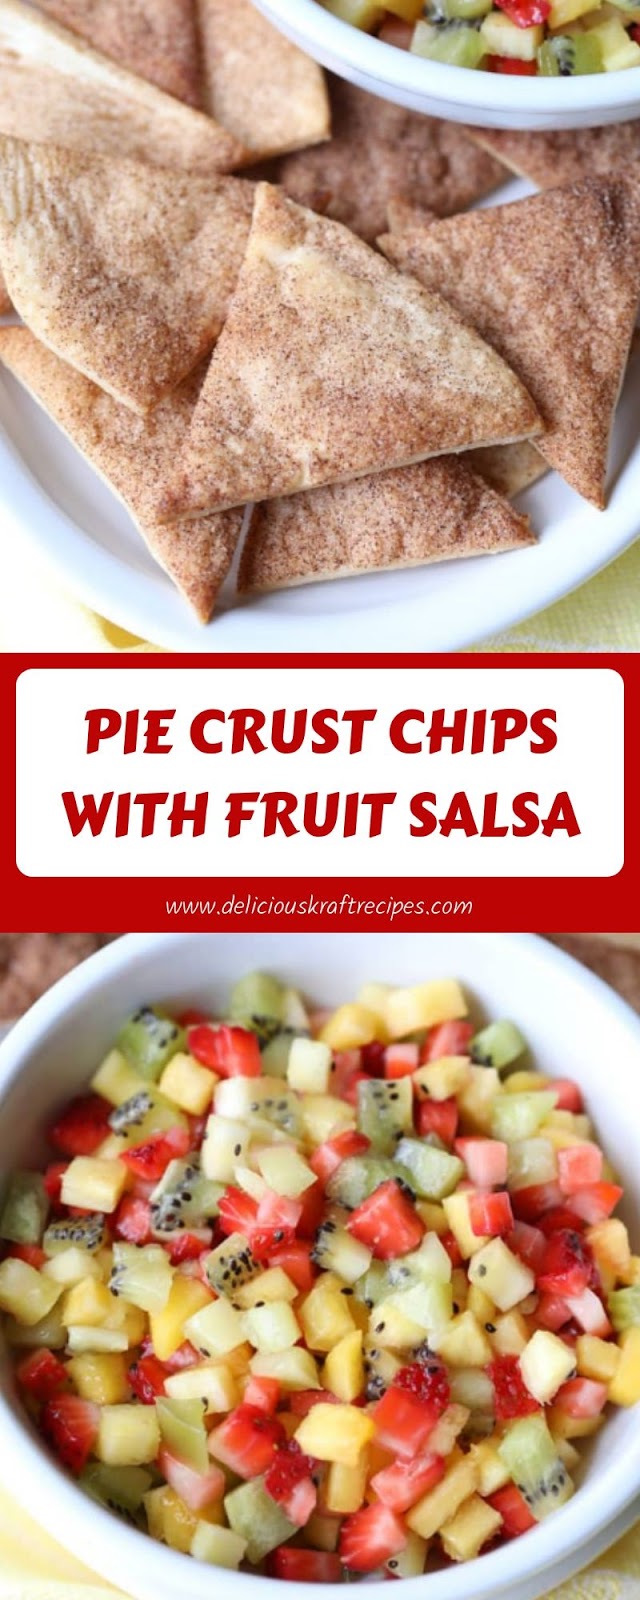 PIE CRUST CHIPS WITH FRUIT SALSA